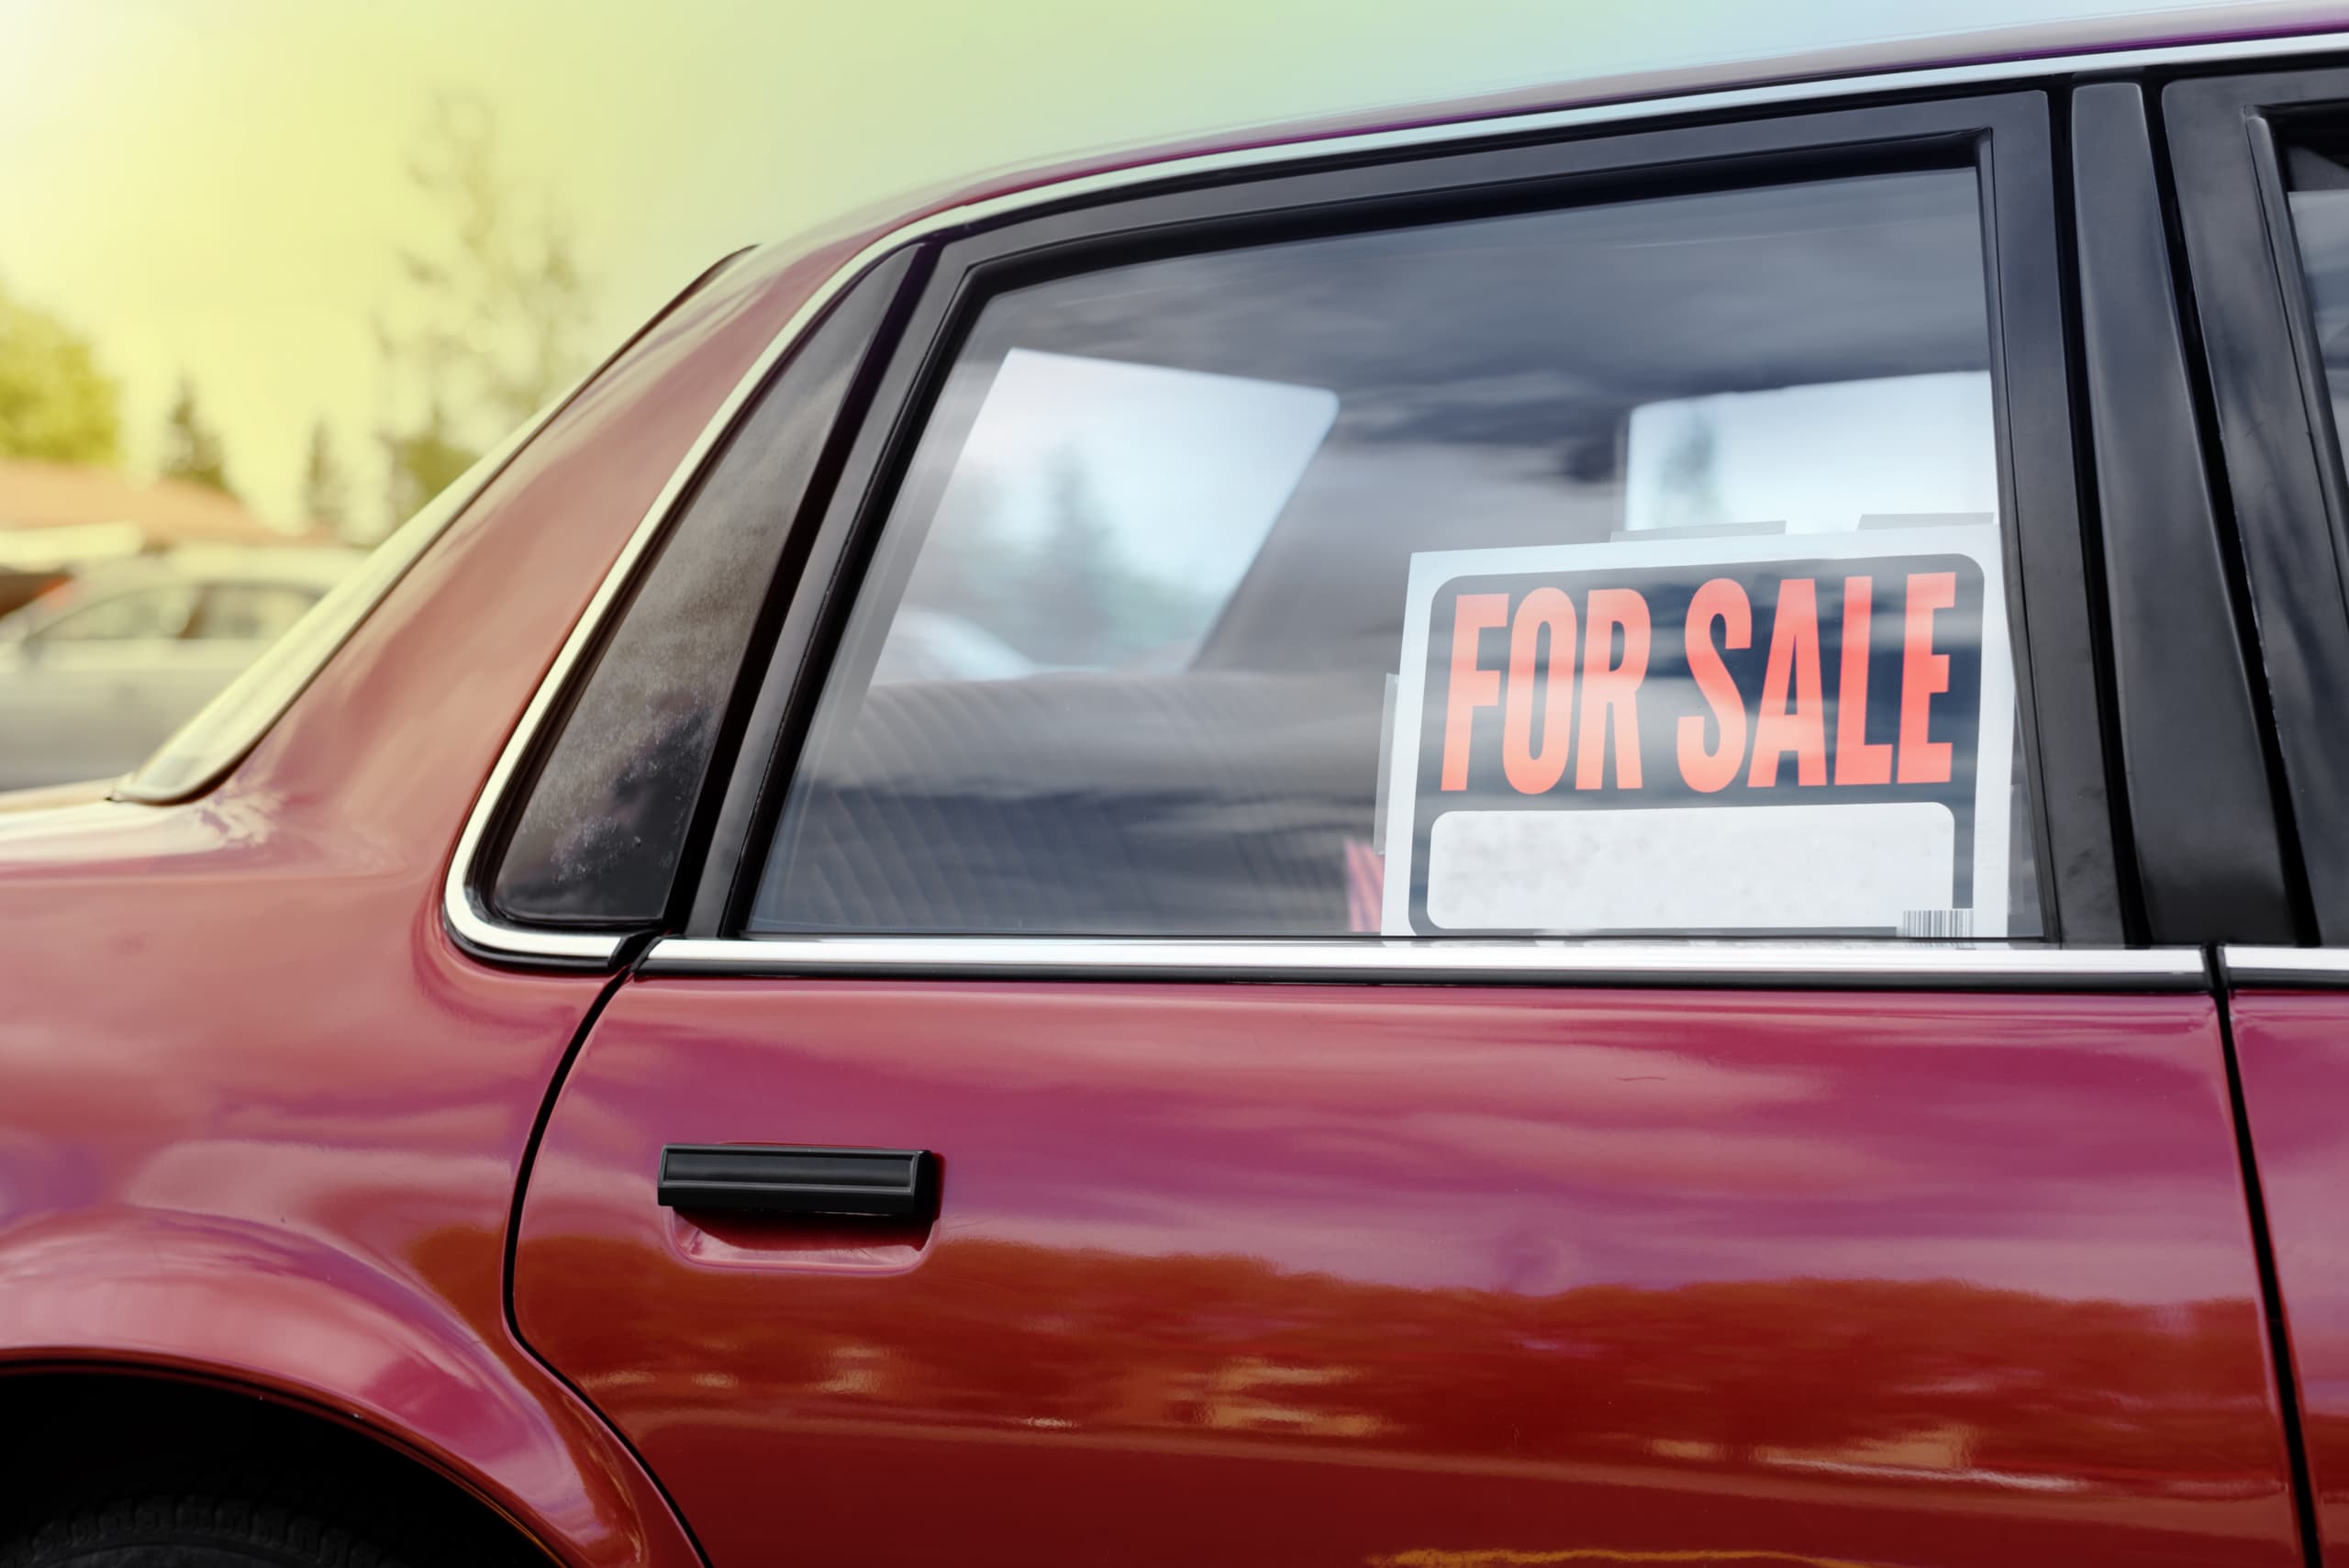 Car for sale - how to transfer car title